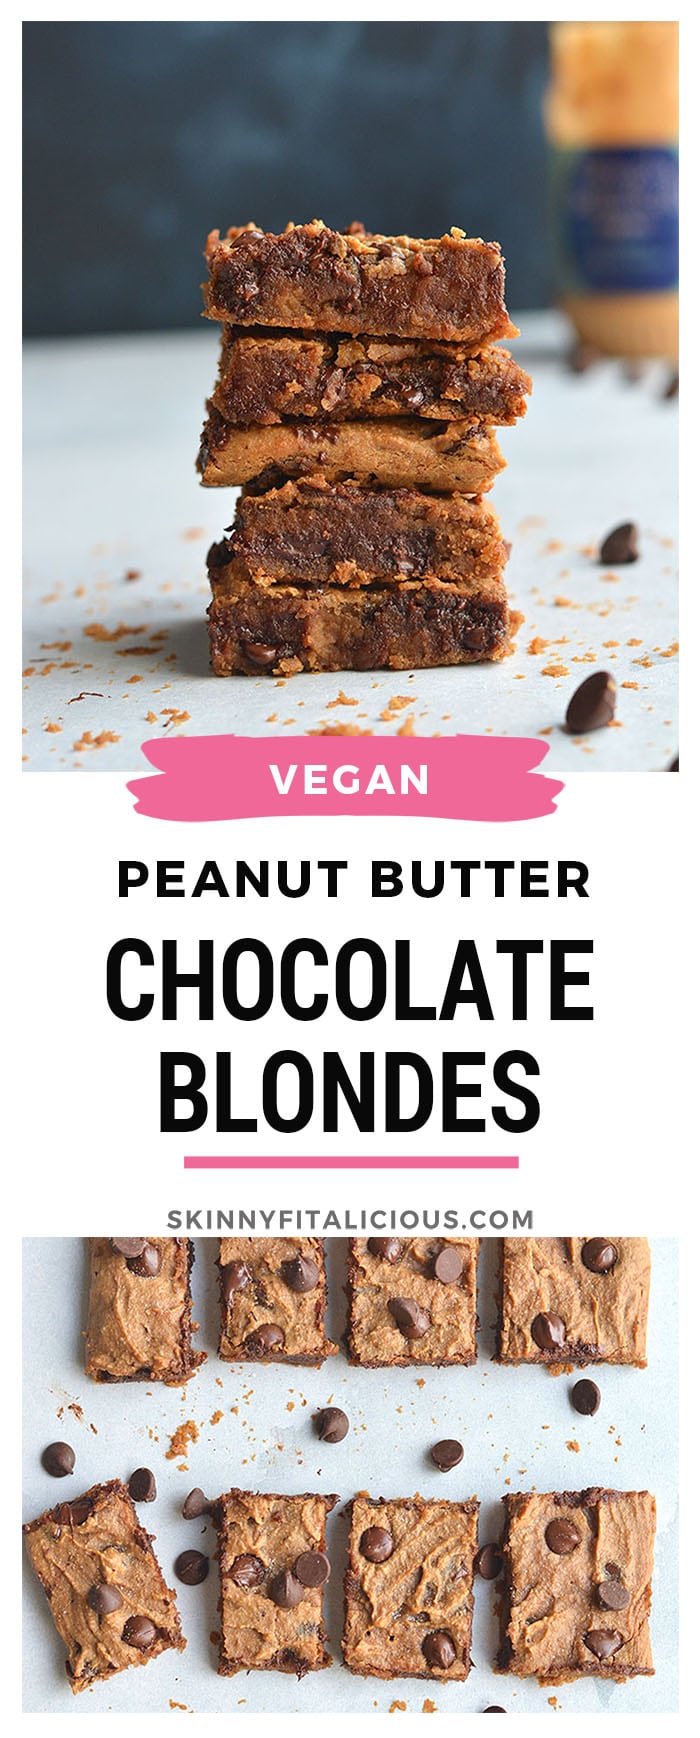 Healthy Peanut Butter Chocolate Blondes! This Vegan dessert recipe is low calorie, made with real peanut butter and topped with dairy free chocolate chips. The perfect, easy dessert recipe! Paleo option included. Gluten Free + Low Calorie + Vegan